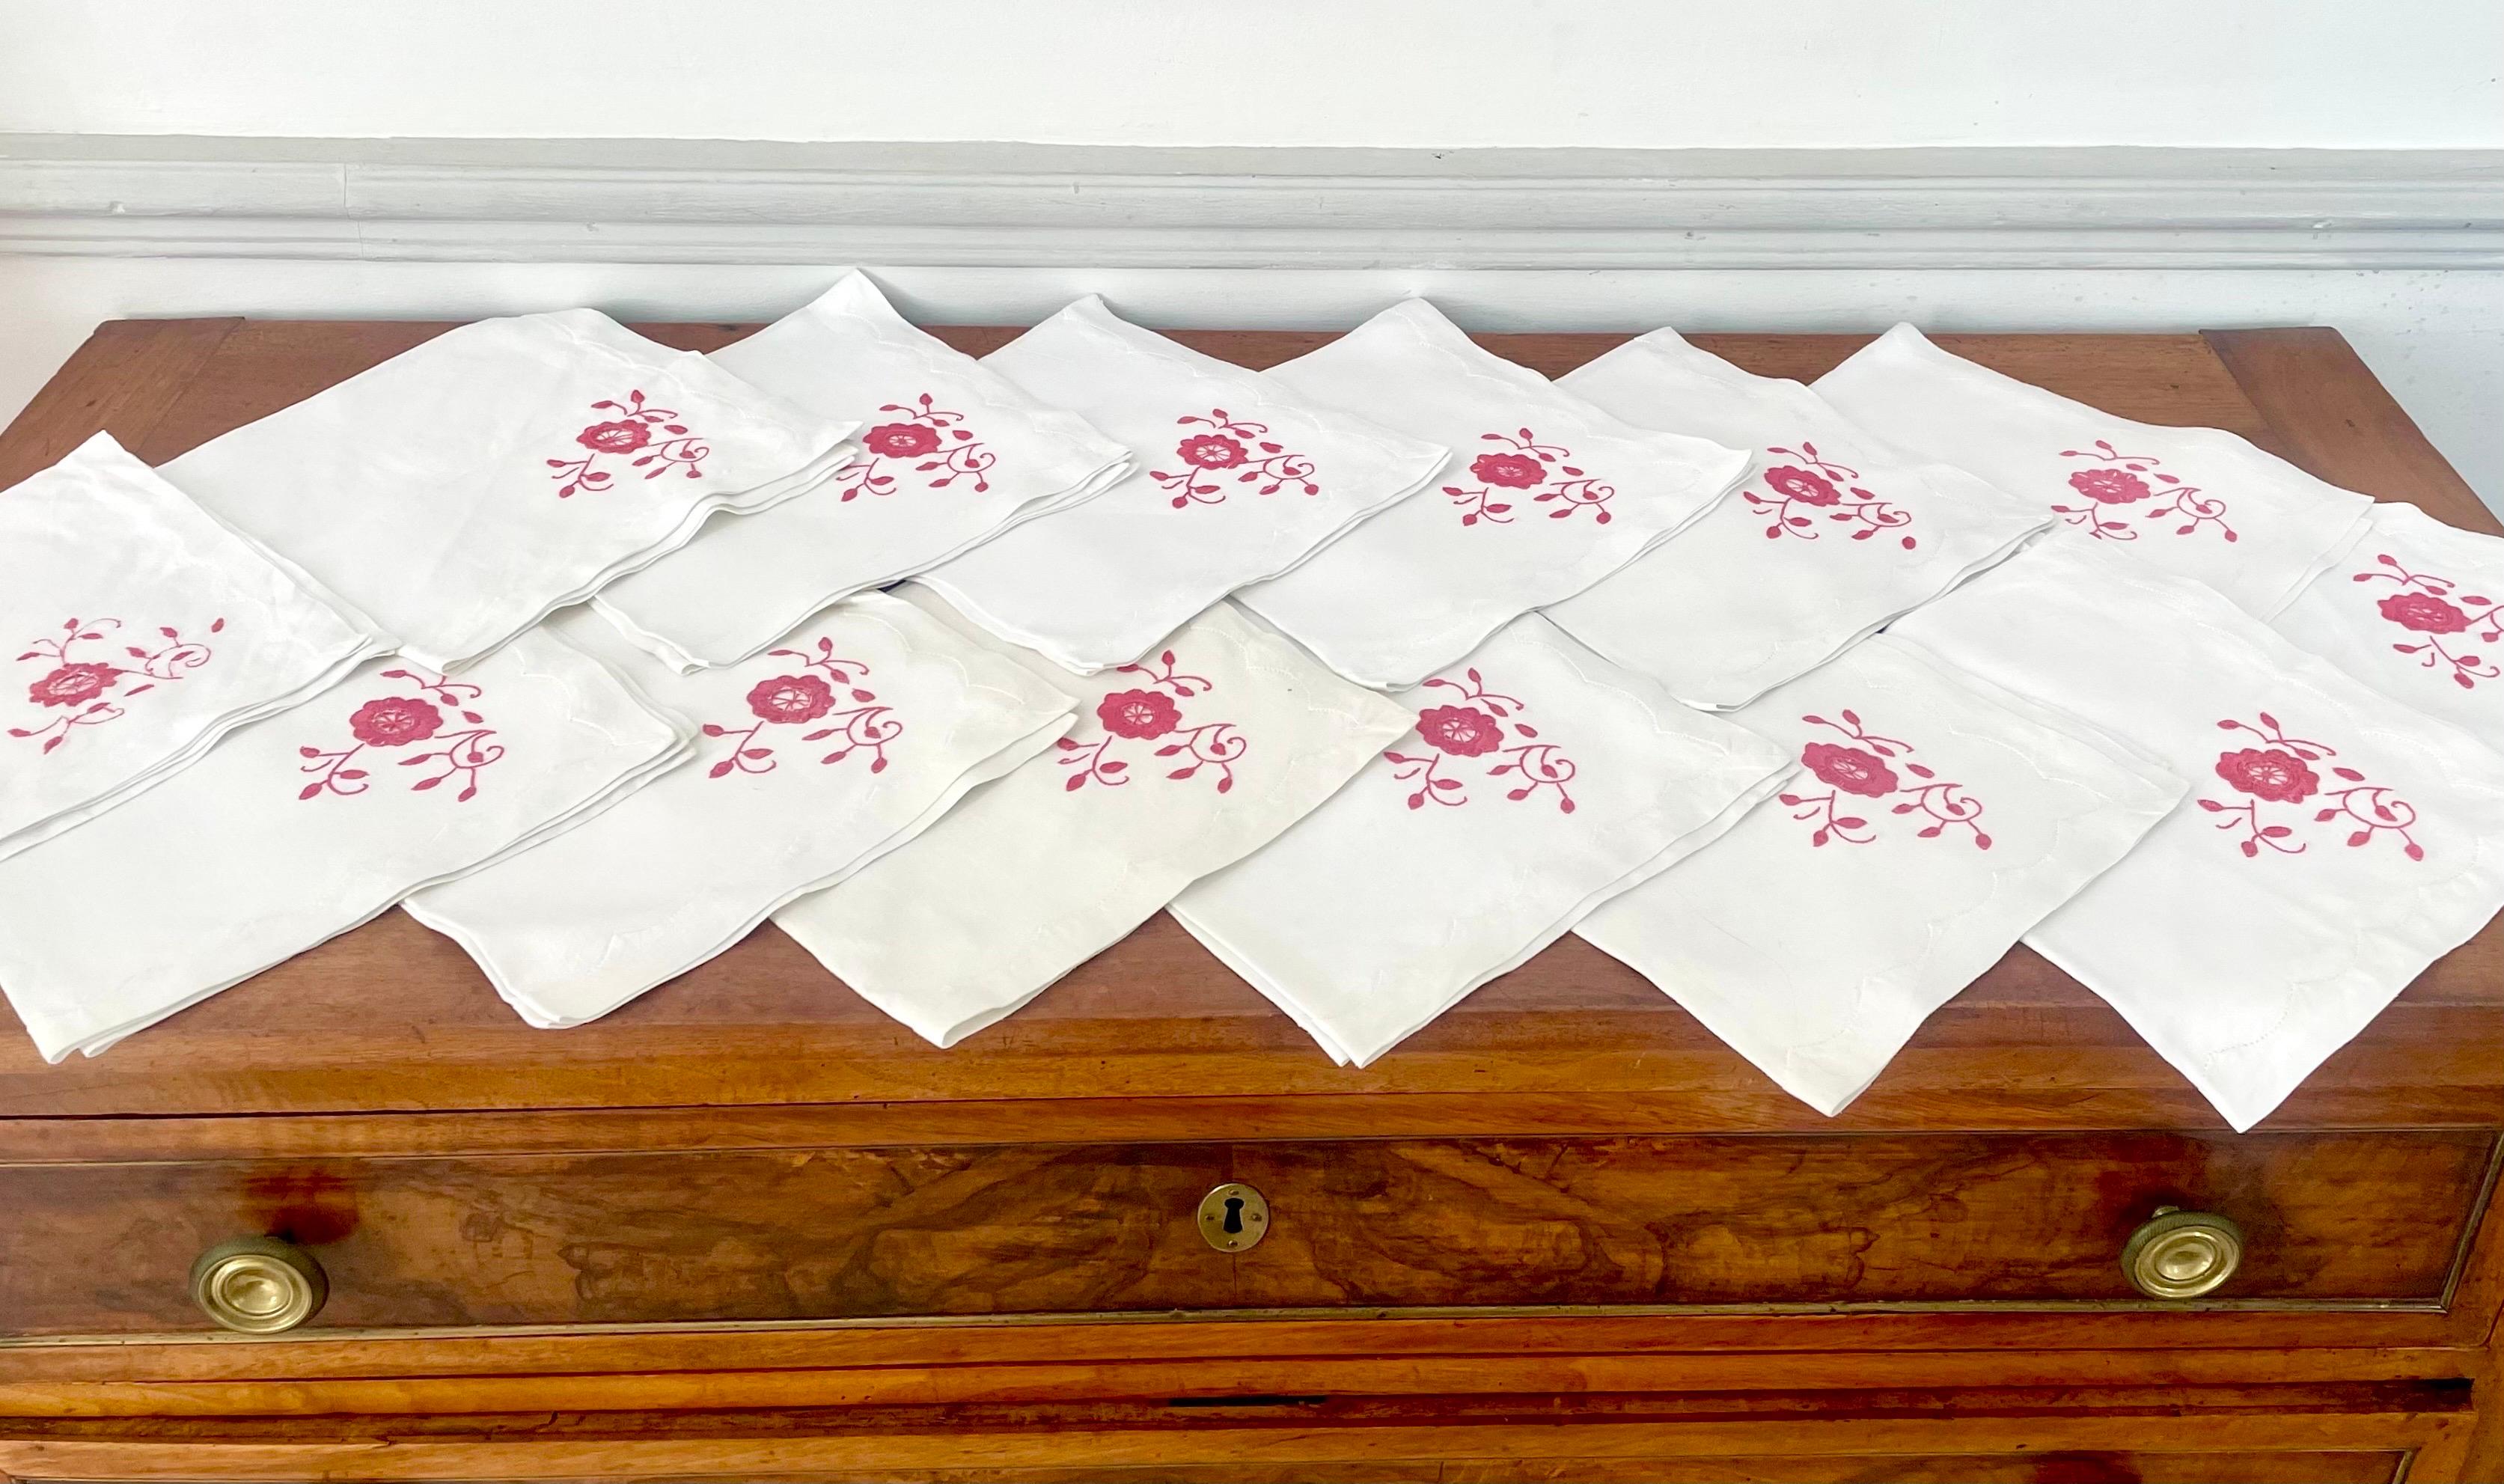 Very nice set of old linen from the end of the beginning of the 20th including 14 assorted towels.
These towels are very elegant and refined. The set is hand-embroidered in red / pink / rosé / rose.
Beautiful set of 14 linen napkins from the